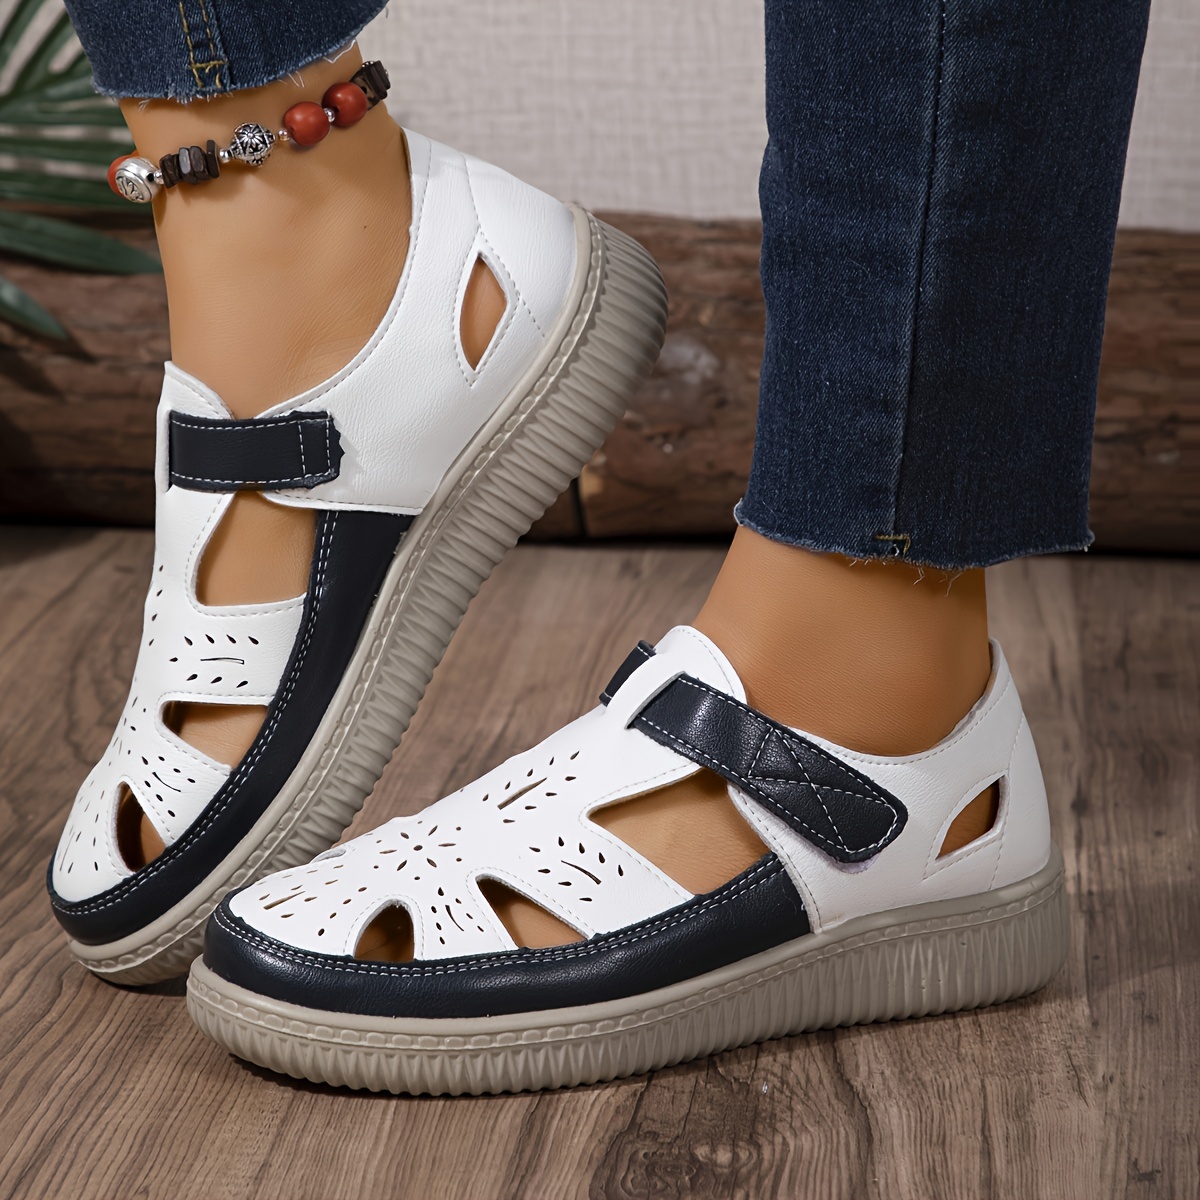 

Women's Contrast Color Flat Sandals, Casual Hollow Out Design Summer Shoes, Comfortable Slip On Sandals